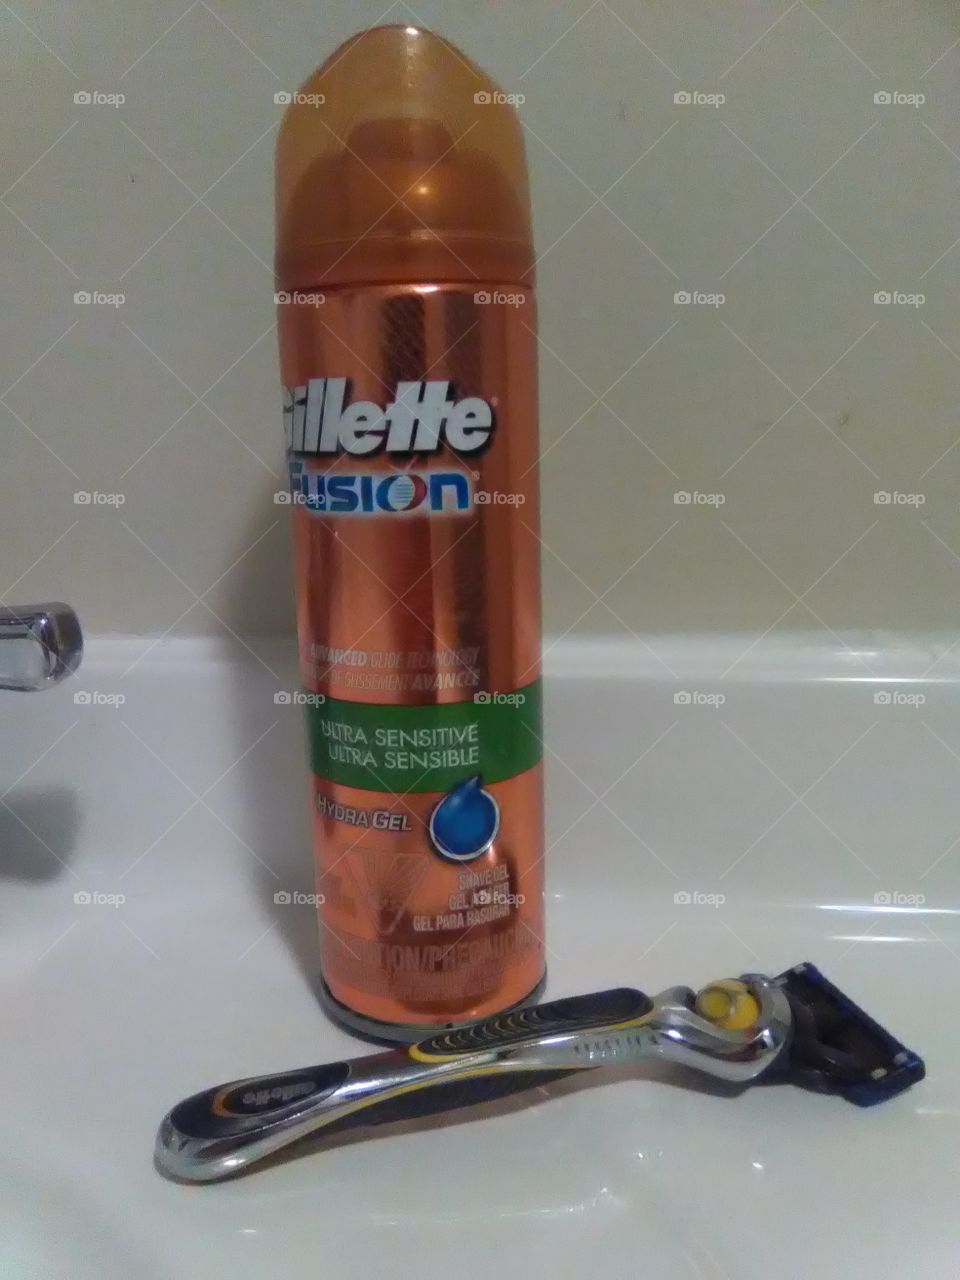 The ritual of shaving everyday